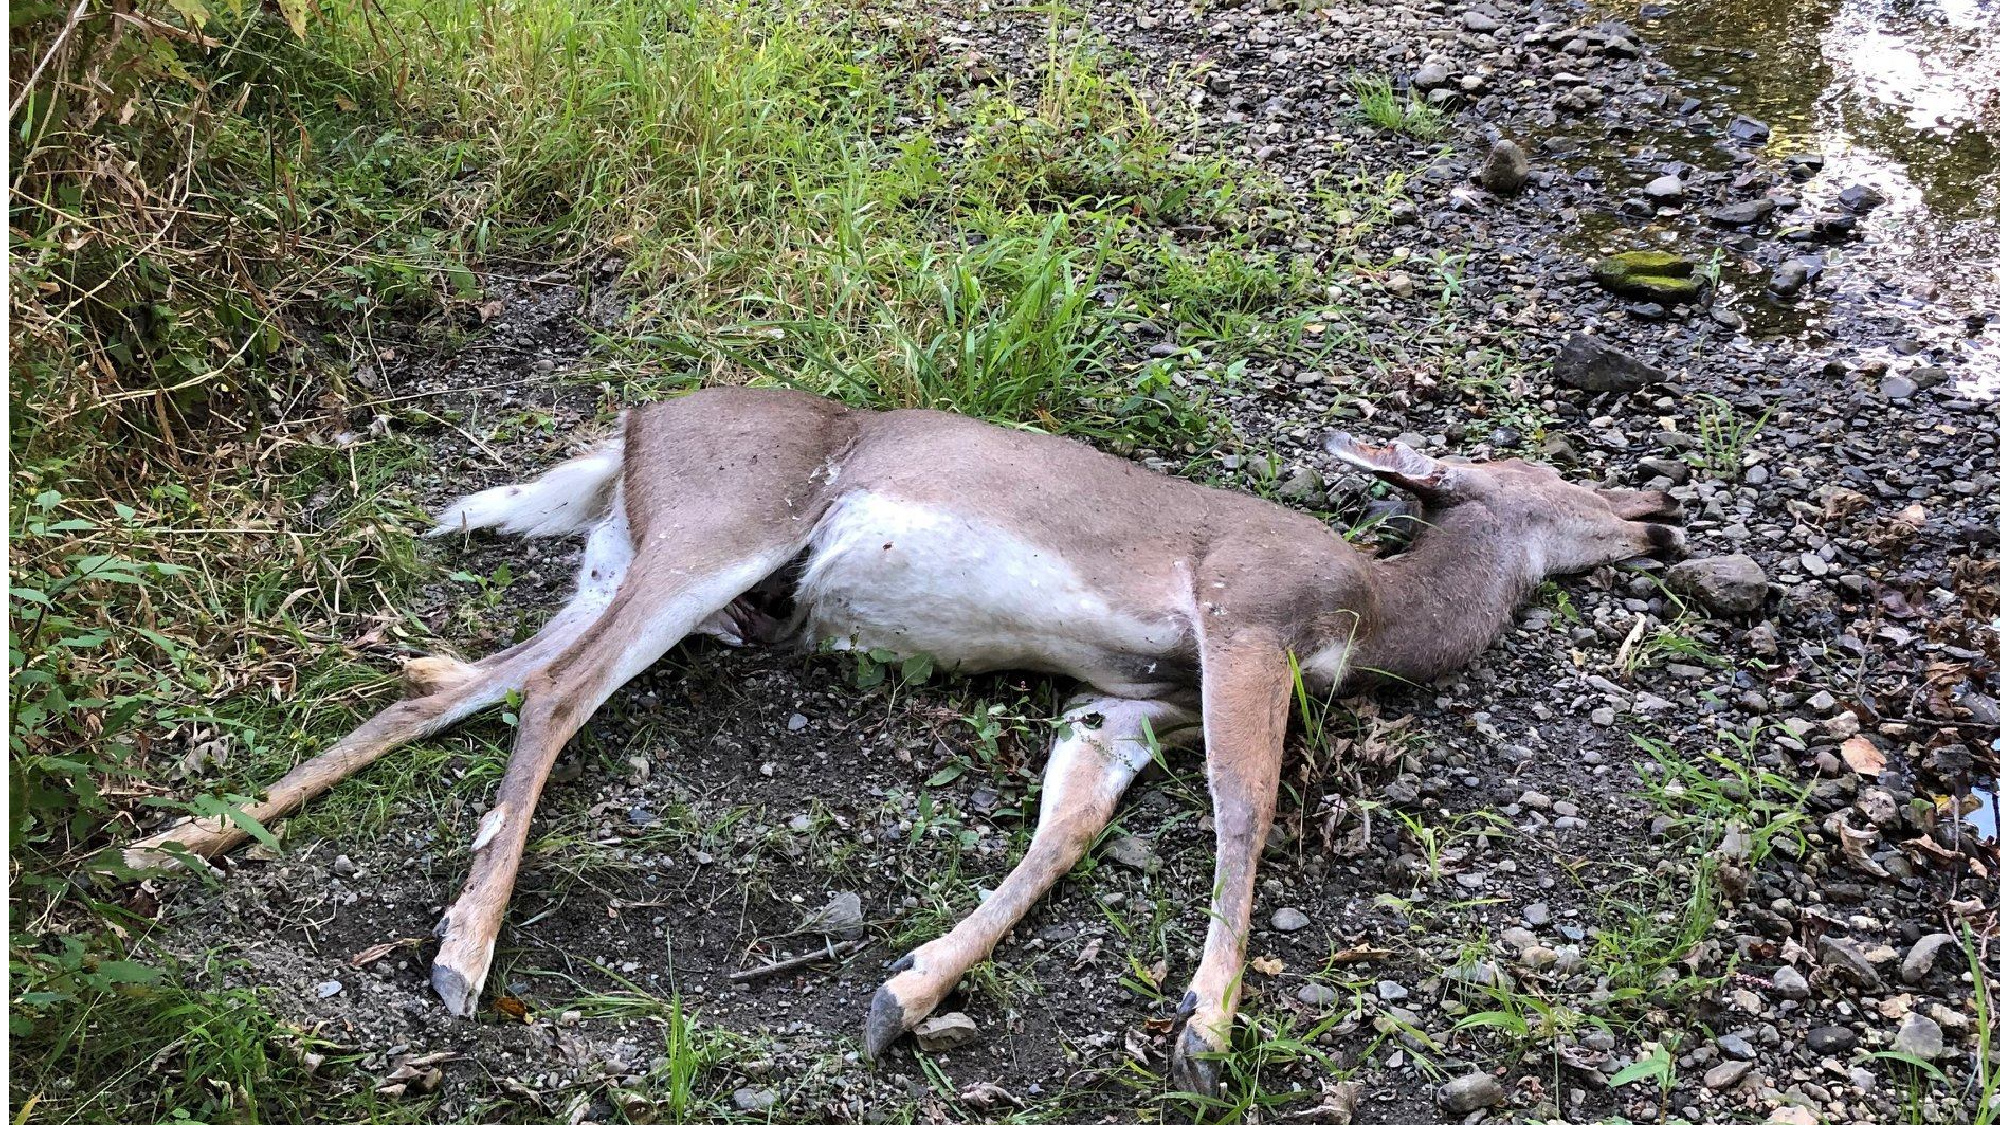 A whitetail deer that died from EHD lays near water.